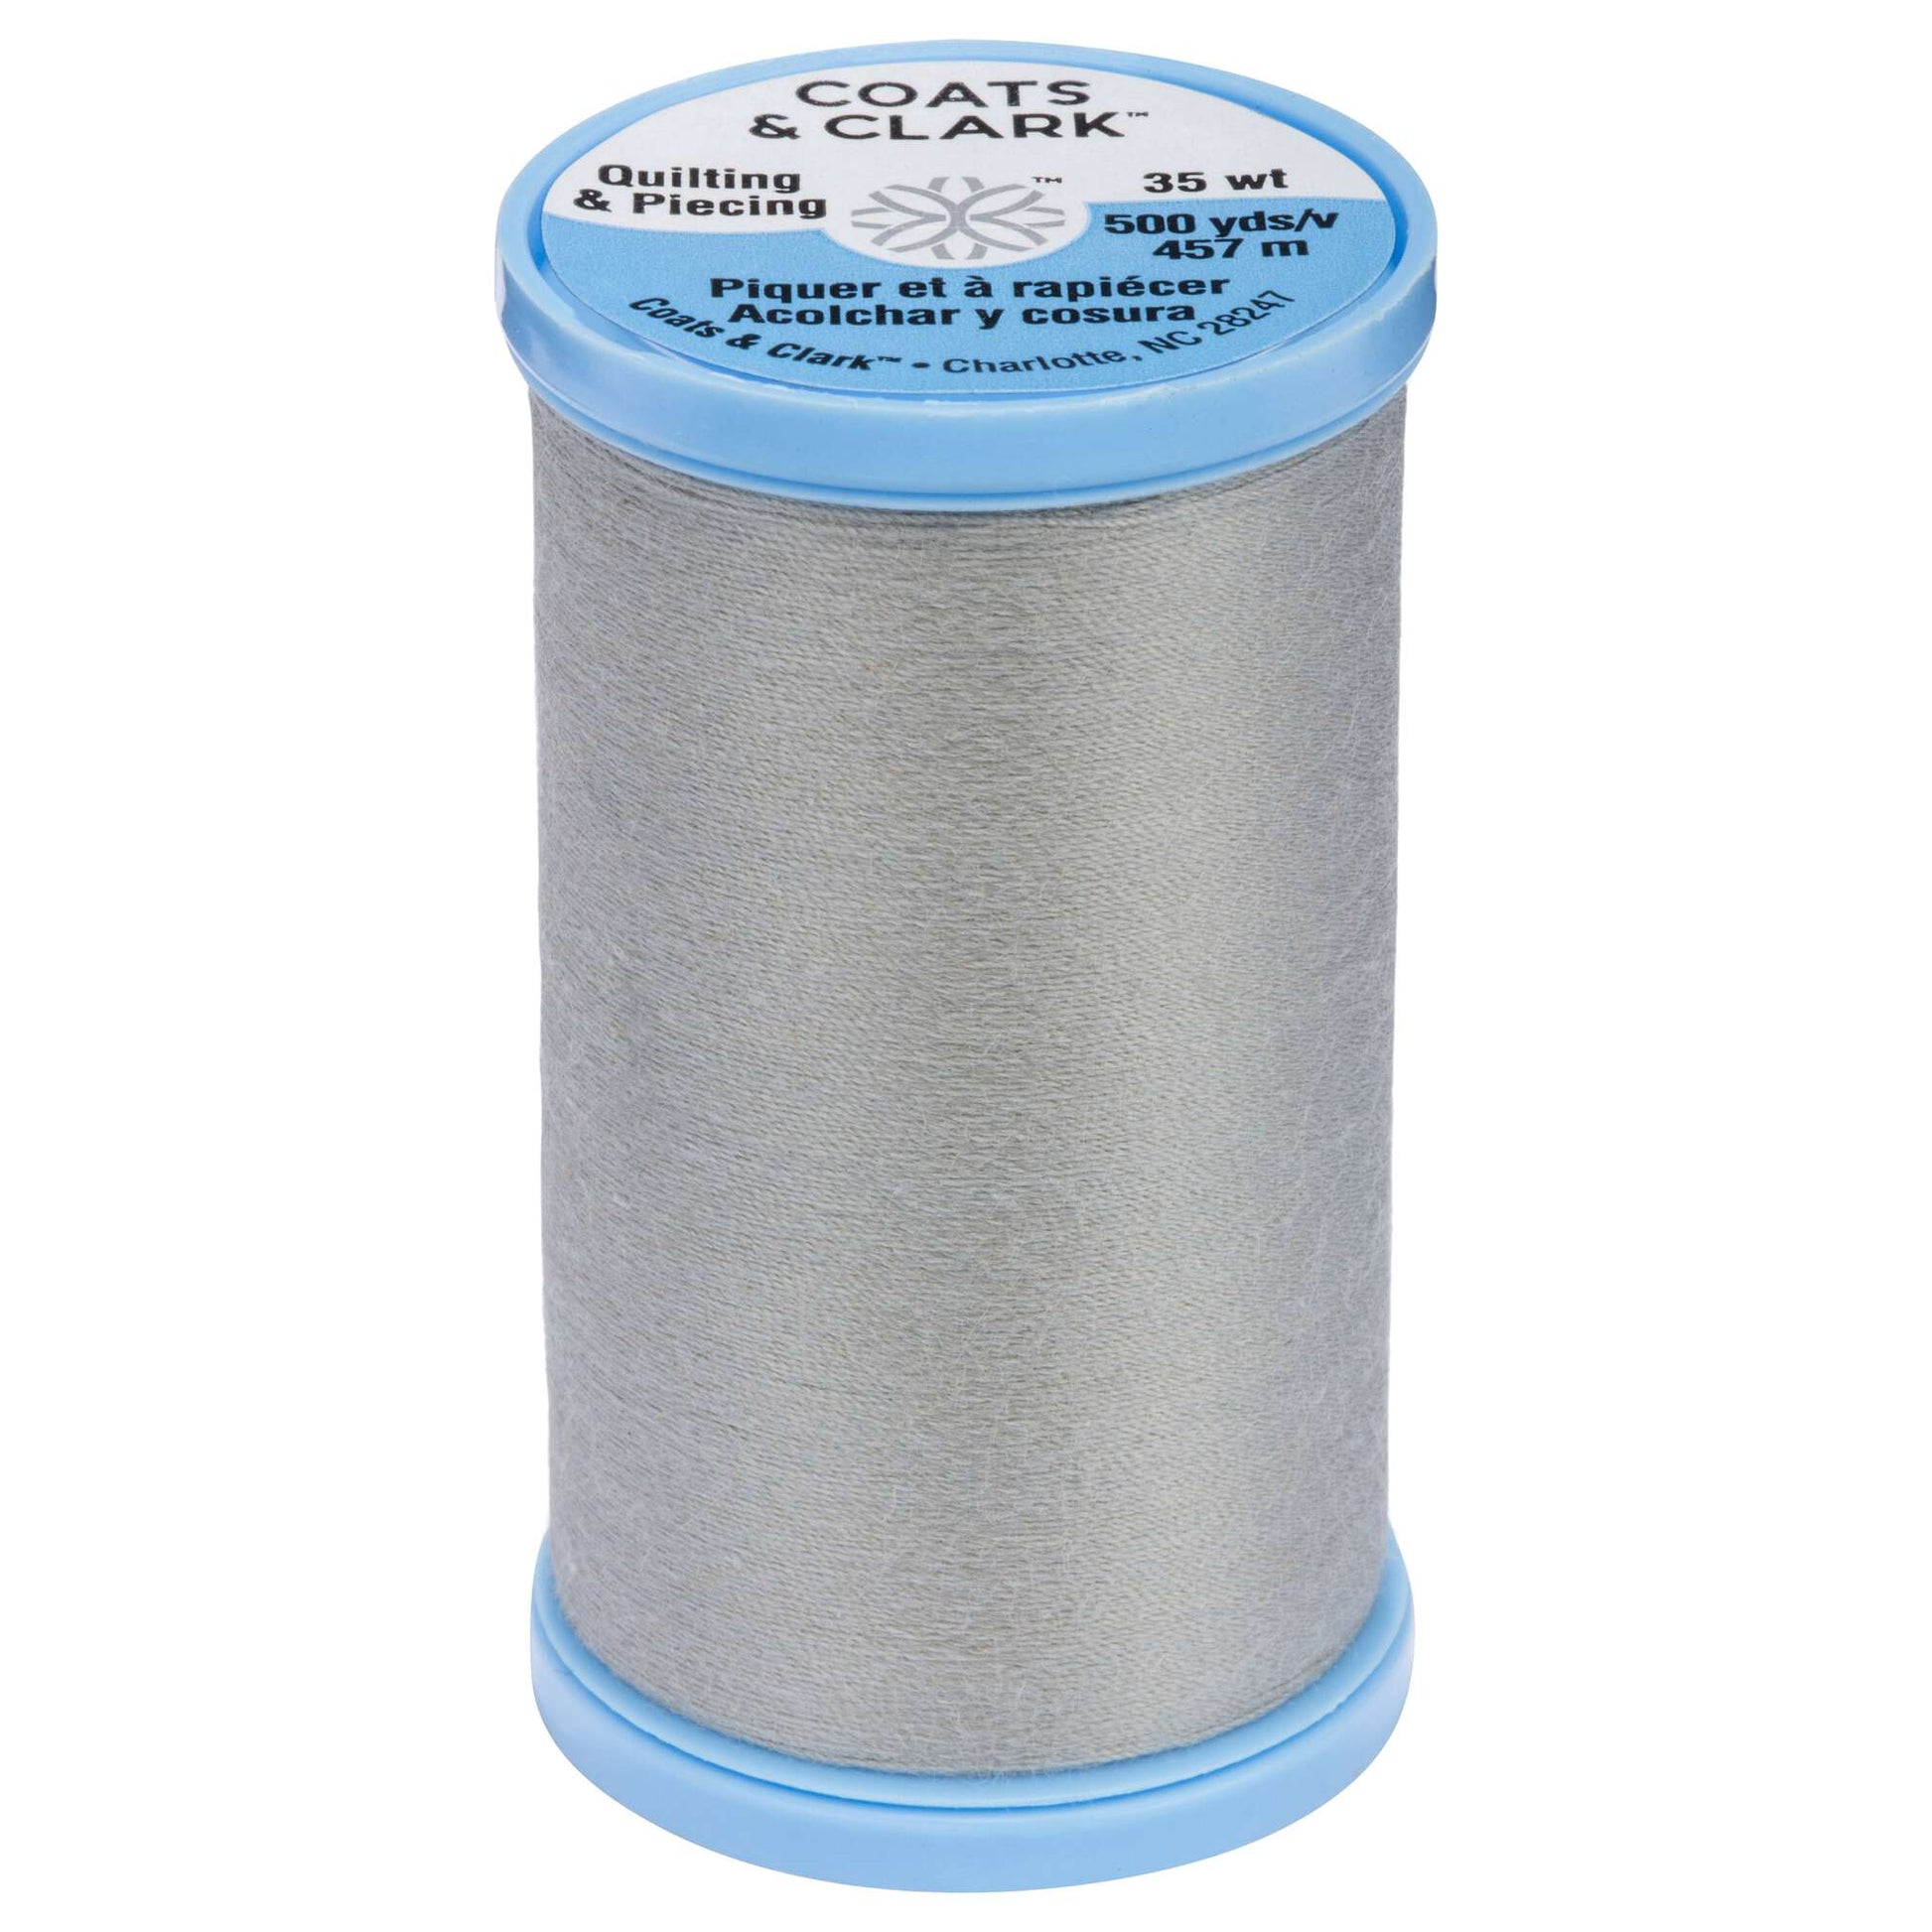 Coats & Clark Cotton Covered Quilting & Piecing Thread (500 Yards) Nugray